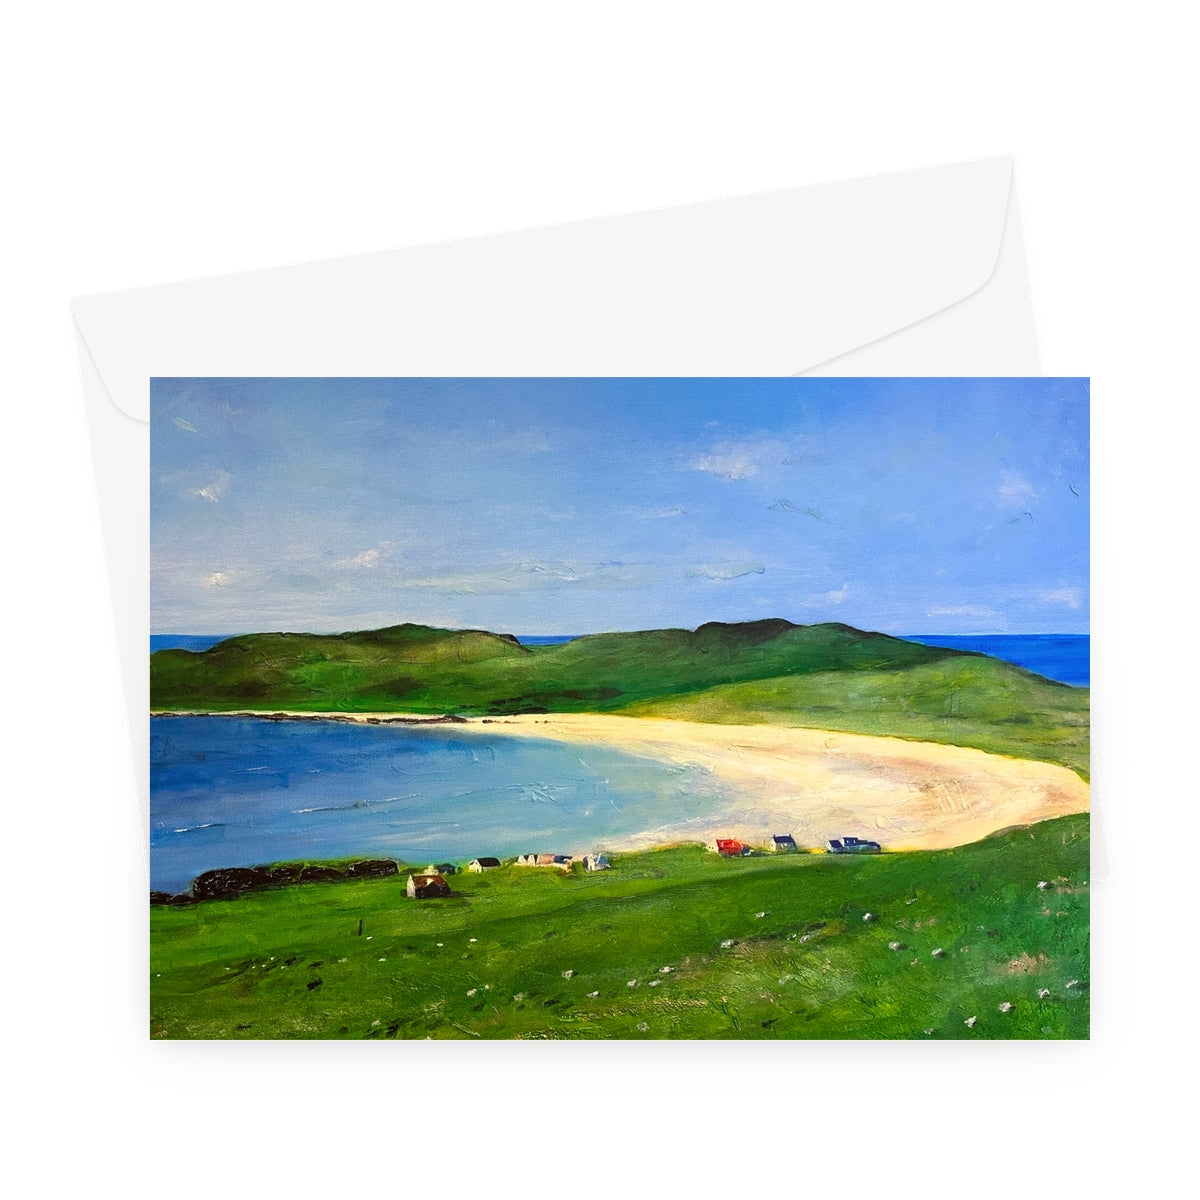 Balephuil Beach Tiree Art Gifts Greeting Card-Greetings Cards-Hebridean Islands Art Gallery-A5 Landscape-1 Card-Paintings, Prints, Homeware, Art Gifts From Scotland By Scottish Artist Kevin Hunter